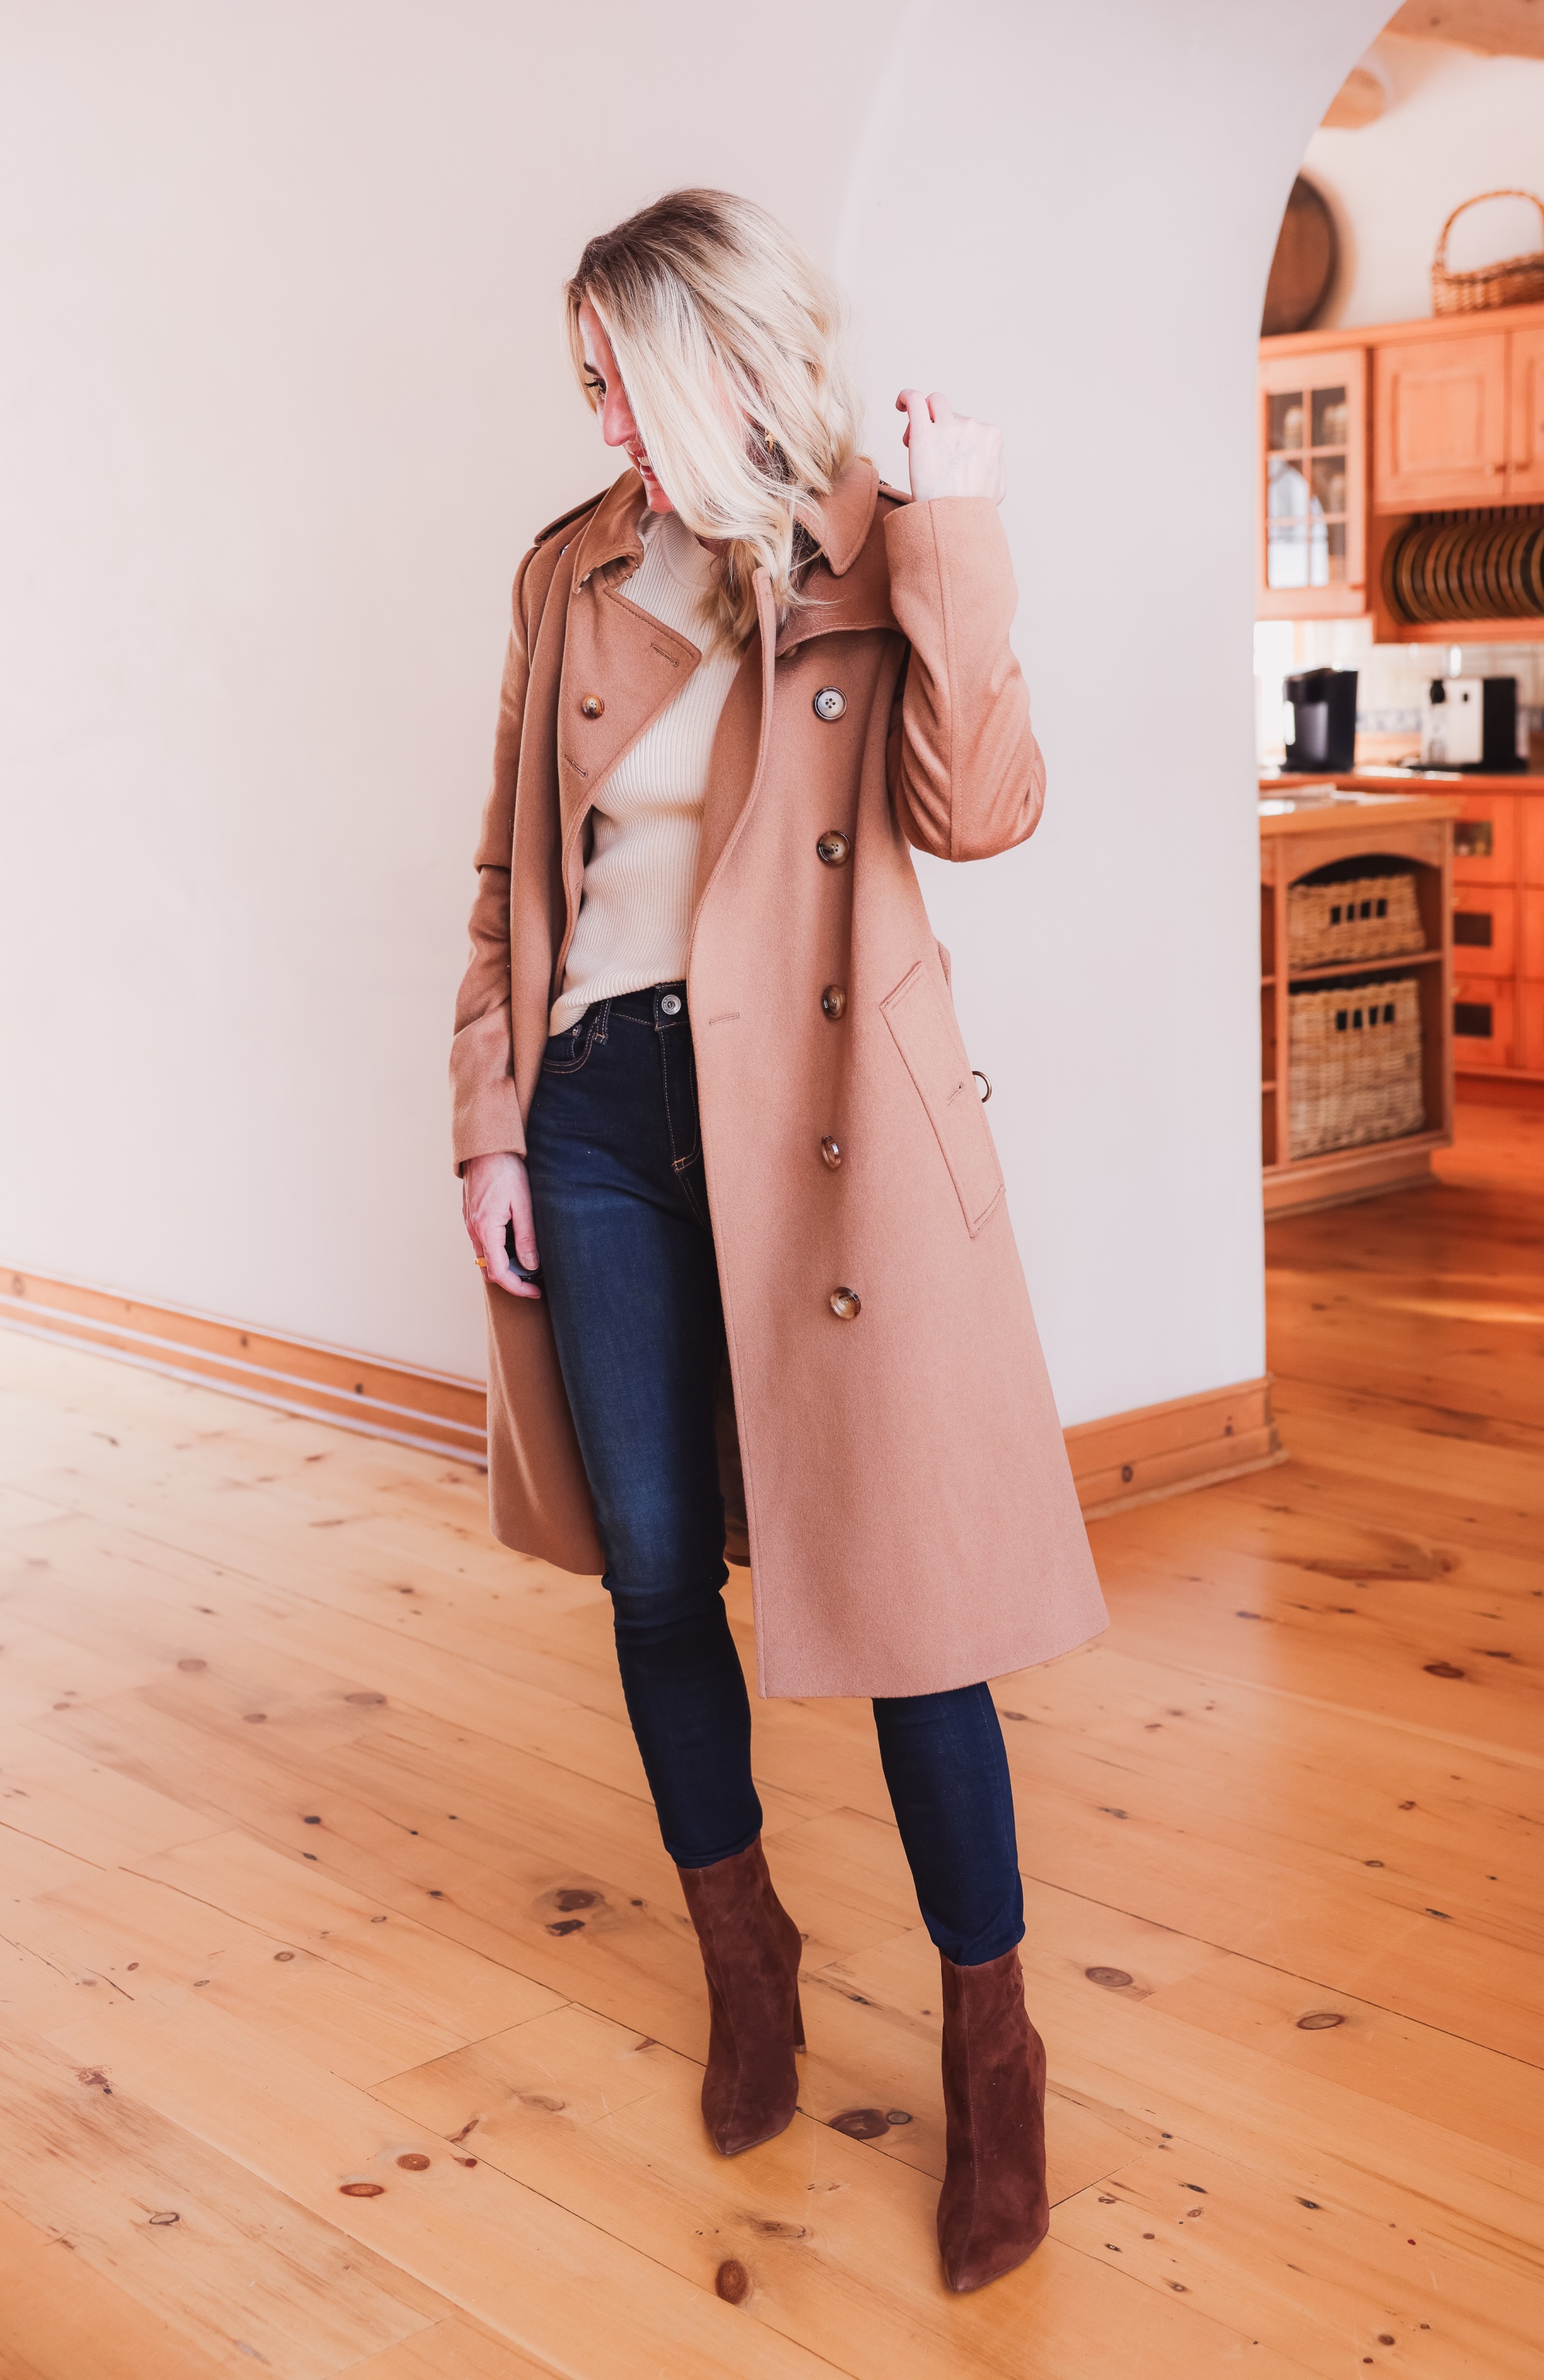 fashion over 40 blogger Erin Busbee wearing stiletto Steve Madden suede brown booties with dark wash skinny jeans and a Burberry Cashmere trench coat 